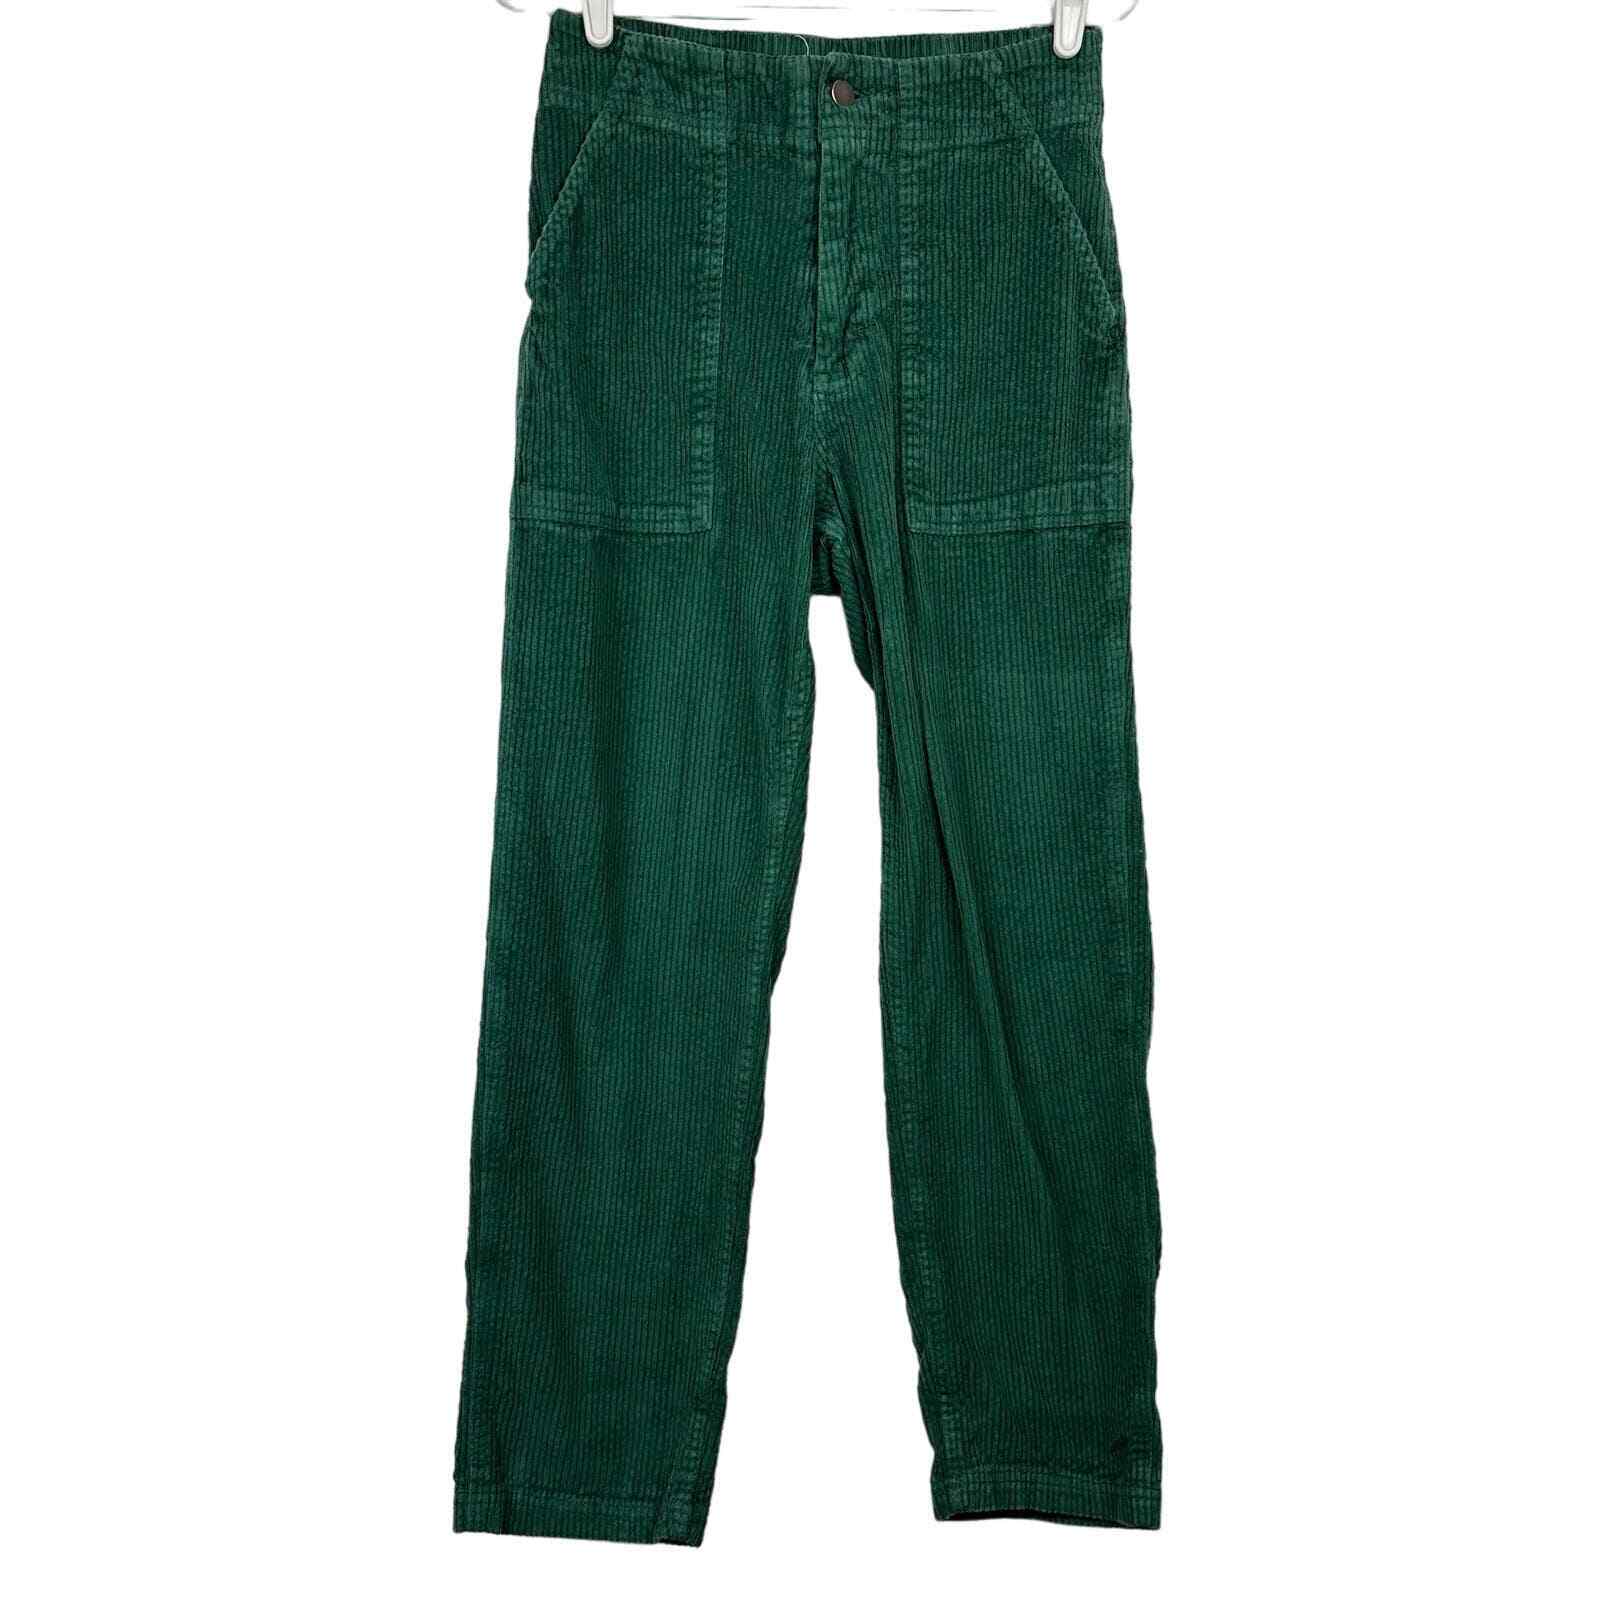 Pact Classic Corduroy Peg Pant Green Med - image 2